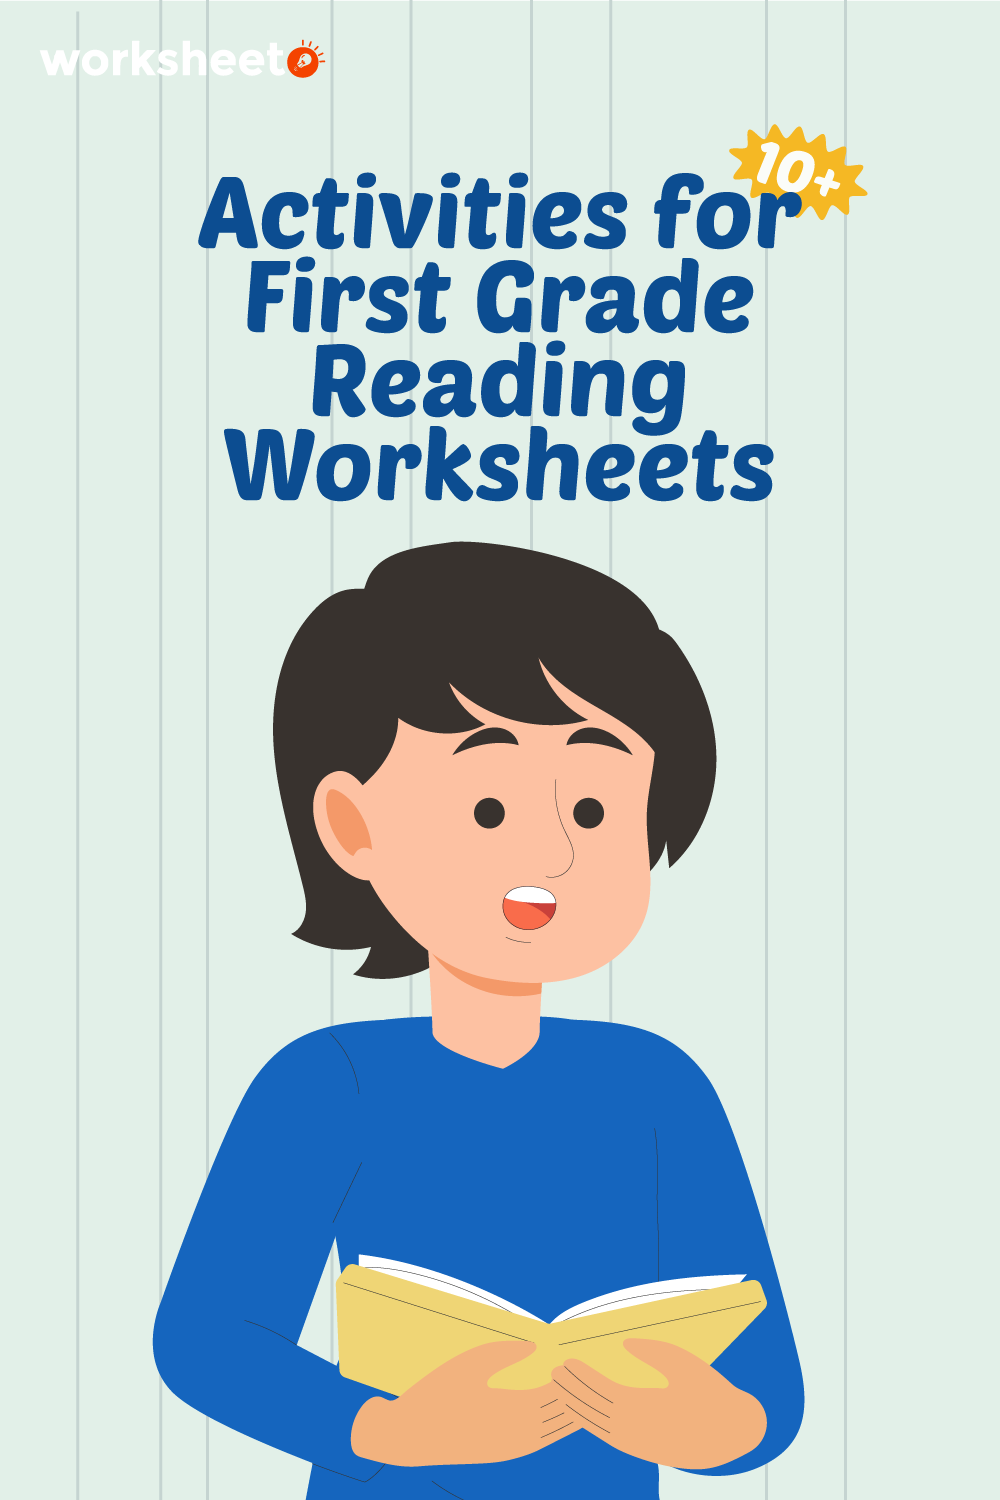 Activities for First Grade Reading Worksheets